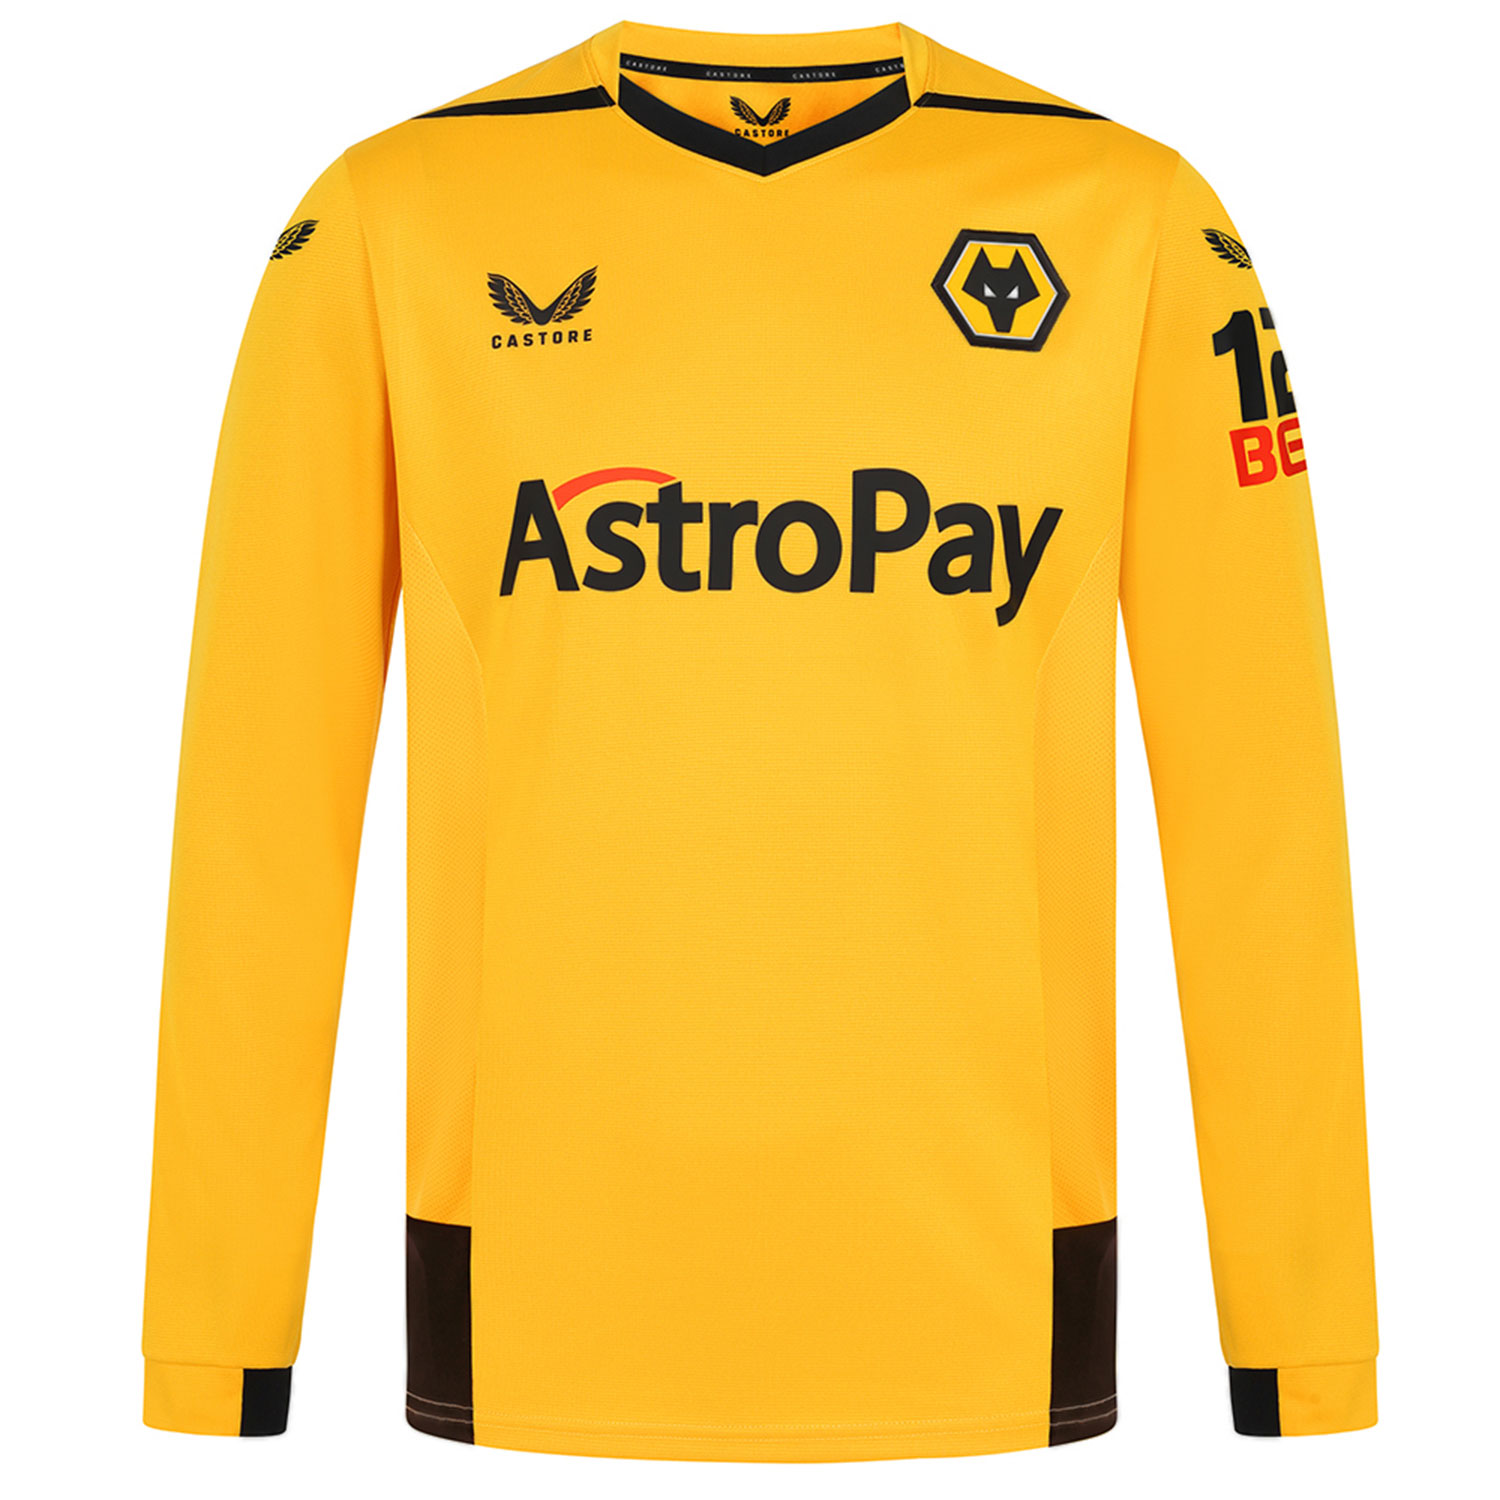 2022-23 Wolves Home Shirt - Long Sleeve
Be Part Of the Pack, with the 2022-23 Wolves Long Sleeved Home Shirt and show your pride on the street and in the stands.
Featuring detailed colour matching and dyeing to be true Wolves Gold and bring it back home to the club and fans.

Angular mesh inner sleeve and body panels for extra ventilation
Wolves back neck taping
Featuring our new club sponsor AstroPay on front of shirt
Long Sleeved
100% Polyester
